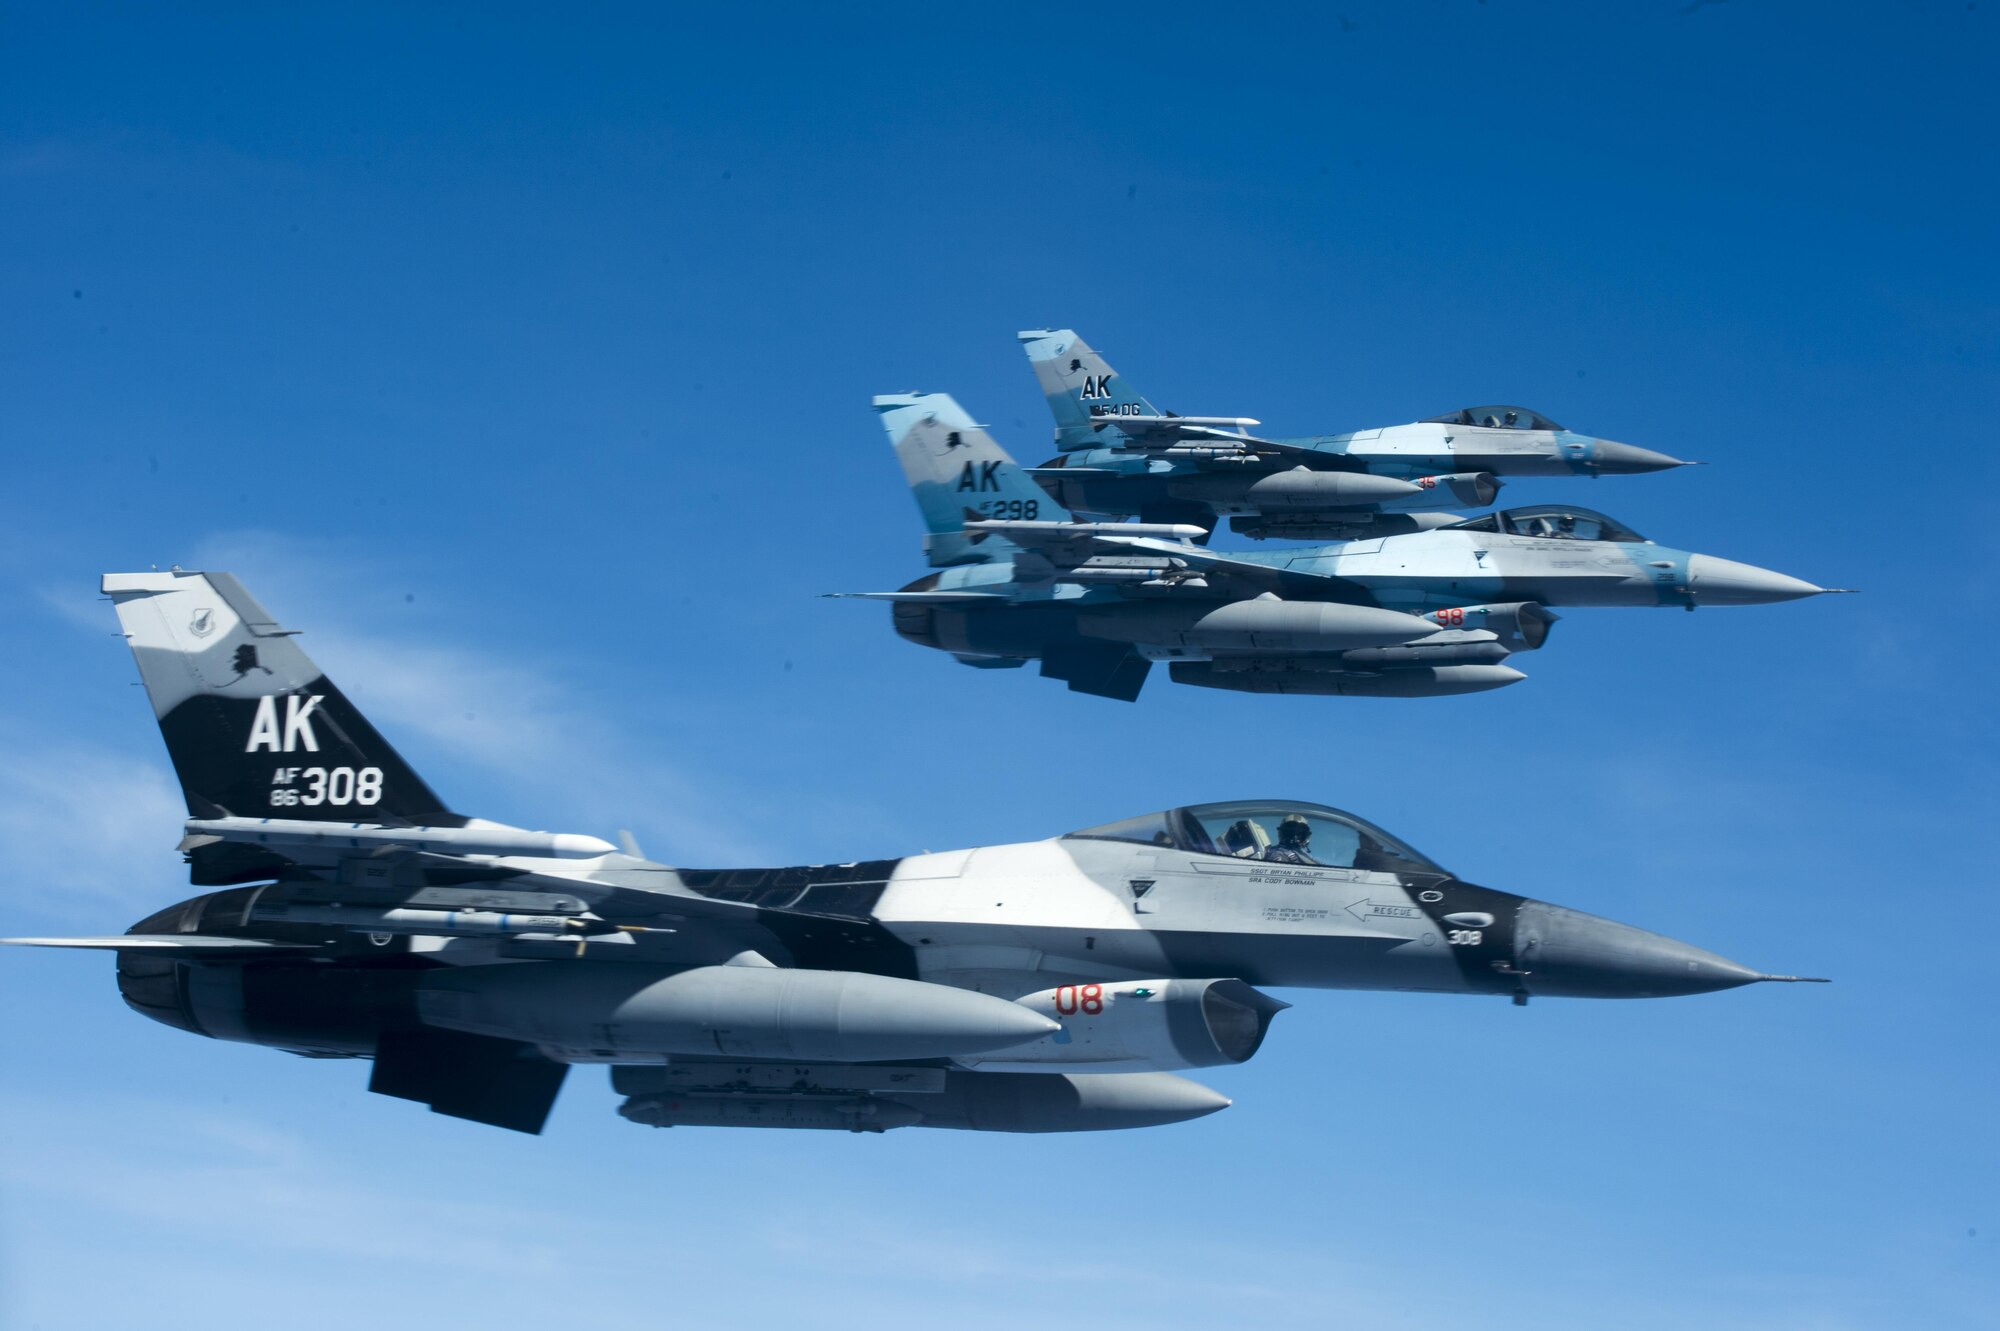 A three-ship formation of U.S. Air Force F-16 Fighting Falcons assigned to the18th Aggressor Squadron fly alongside a U.S. Air Force KC-135 Stratotanker and wait to receive in-flight fuel during Cope North 17, March 2, 2017. The exercise includes 22 total flying units and more than 2,700 personnel from three countries and continues the growth of strong, interoperable relationships within the Indo-Asia-Pacific region through integration of airborne and land-based command and control assets. (U.S. Air Force photo by Staff Sgt. Keith James)